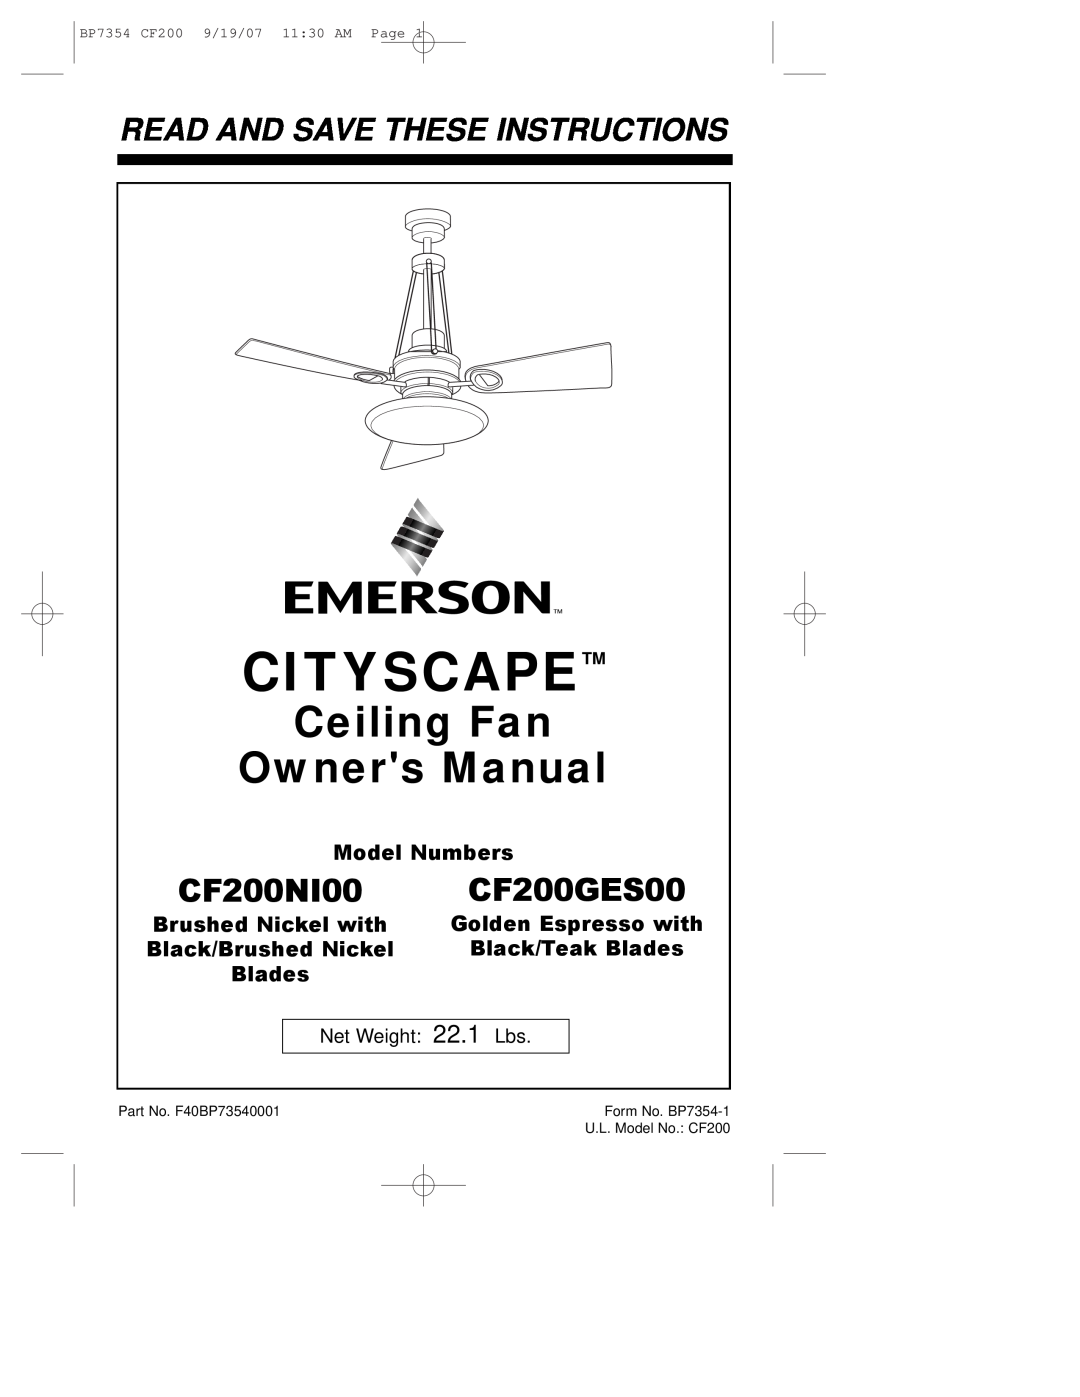 Emerson CF200n100 owner manual Cityscape, Read And Save These Instructions, CF200NI00, CF200GES00, Model Numbers, Blades 